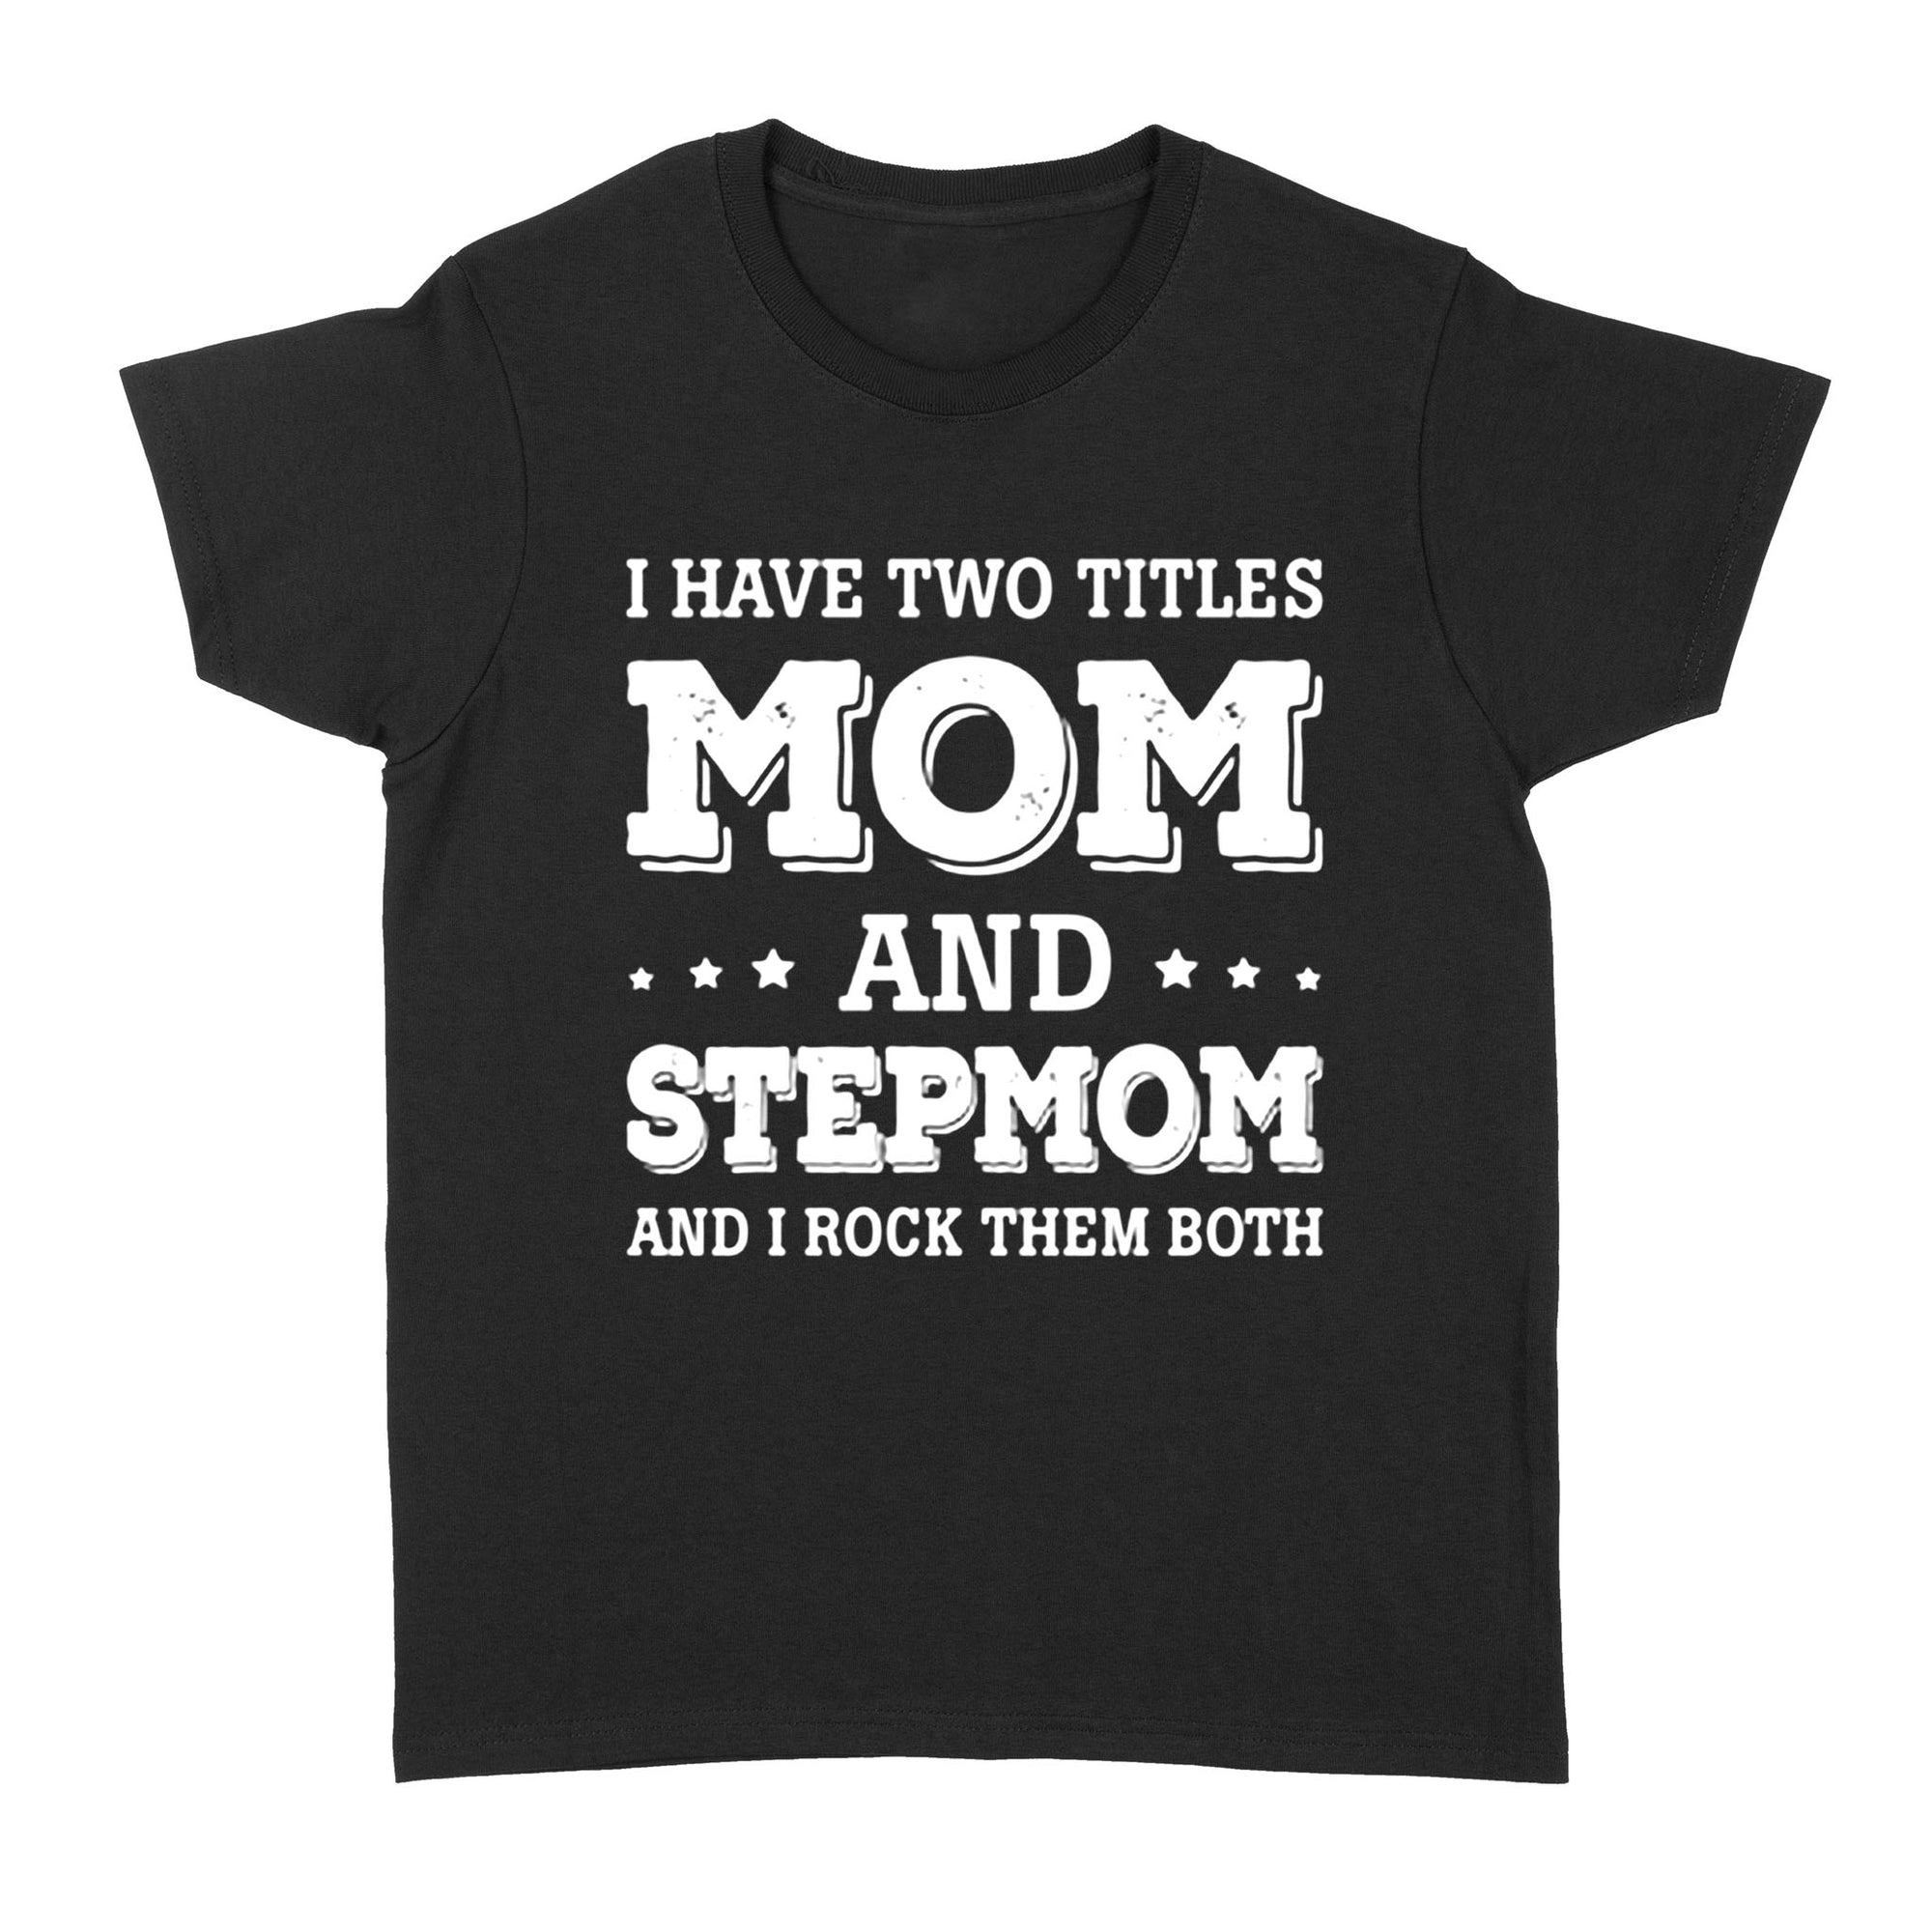 Gift Ideas for Mom Mothers Day I HAVE MOM and stepmom (1) - Standard Women's T-shirt